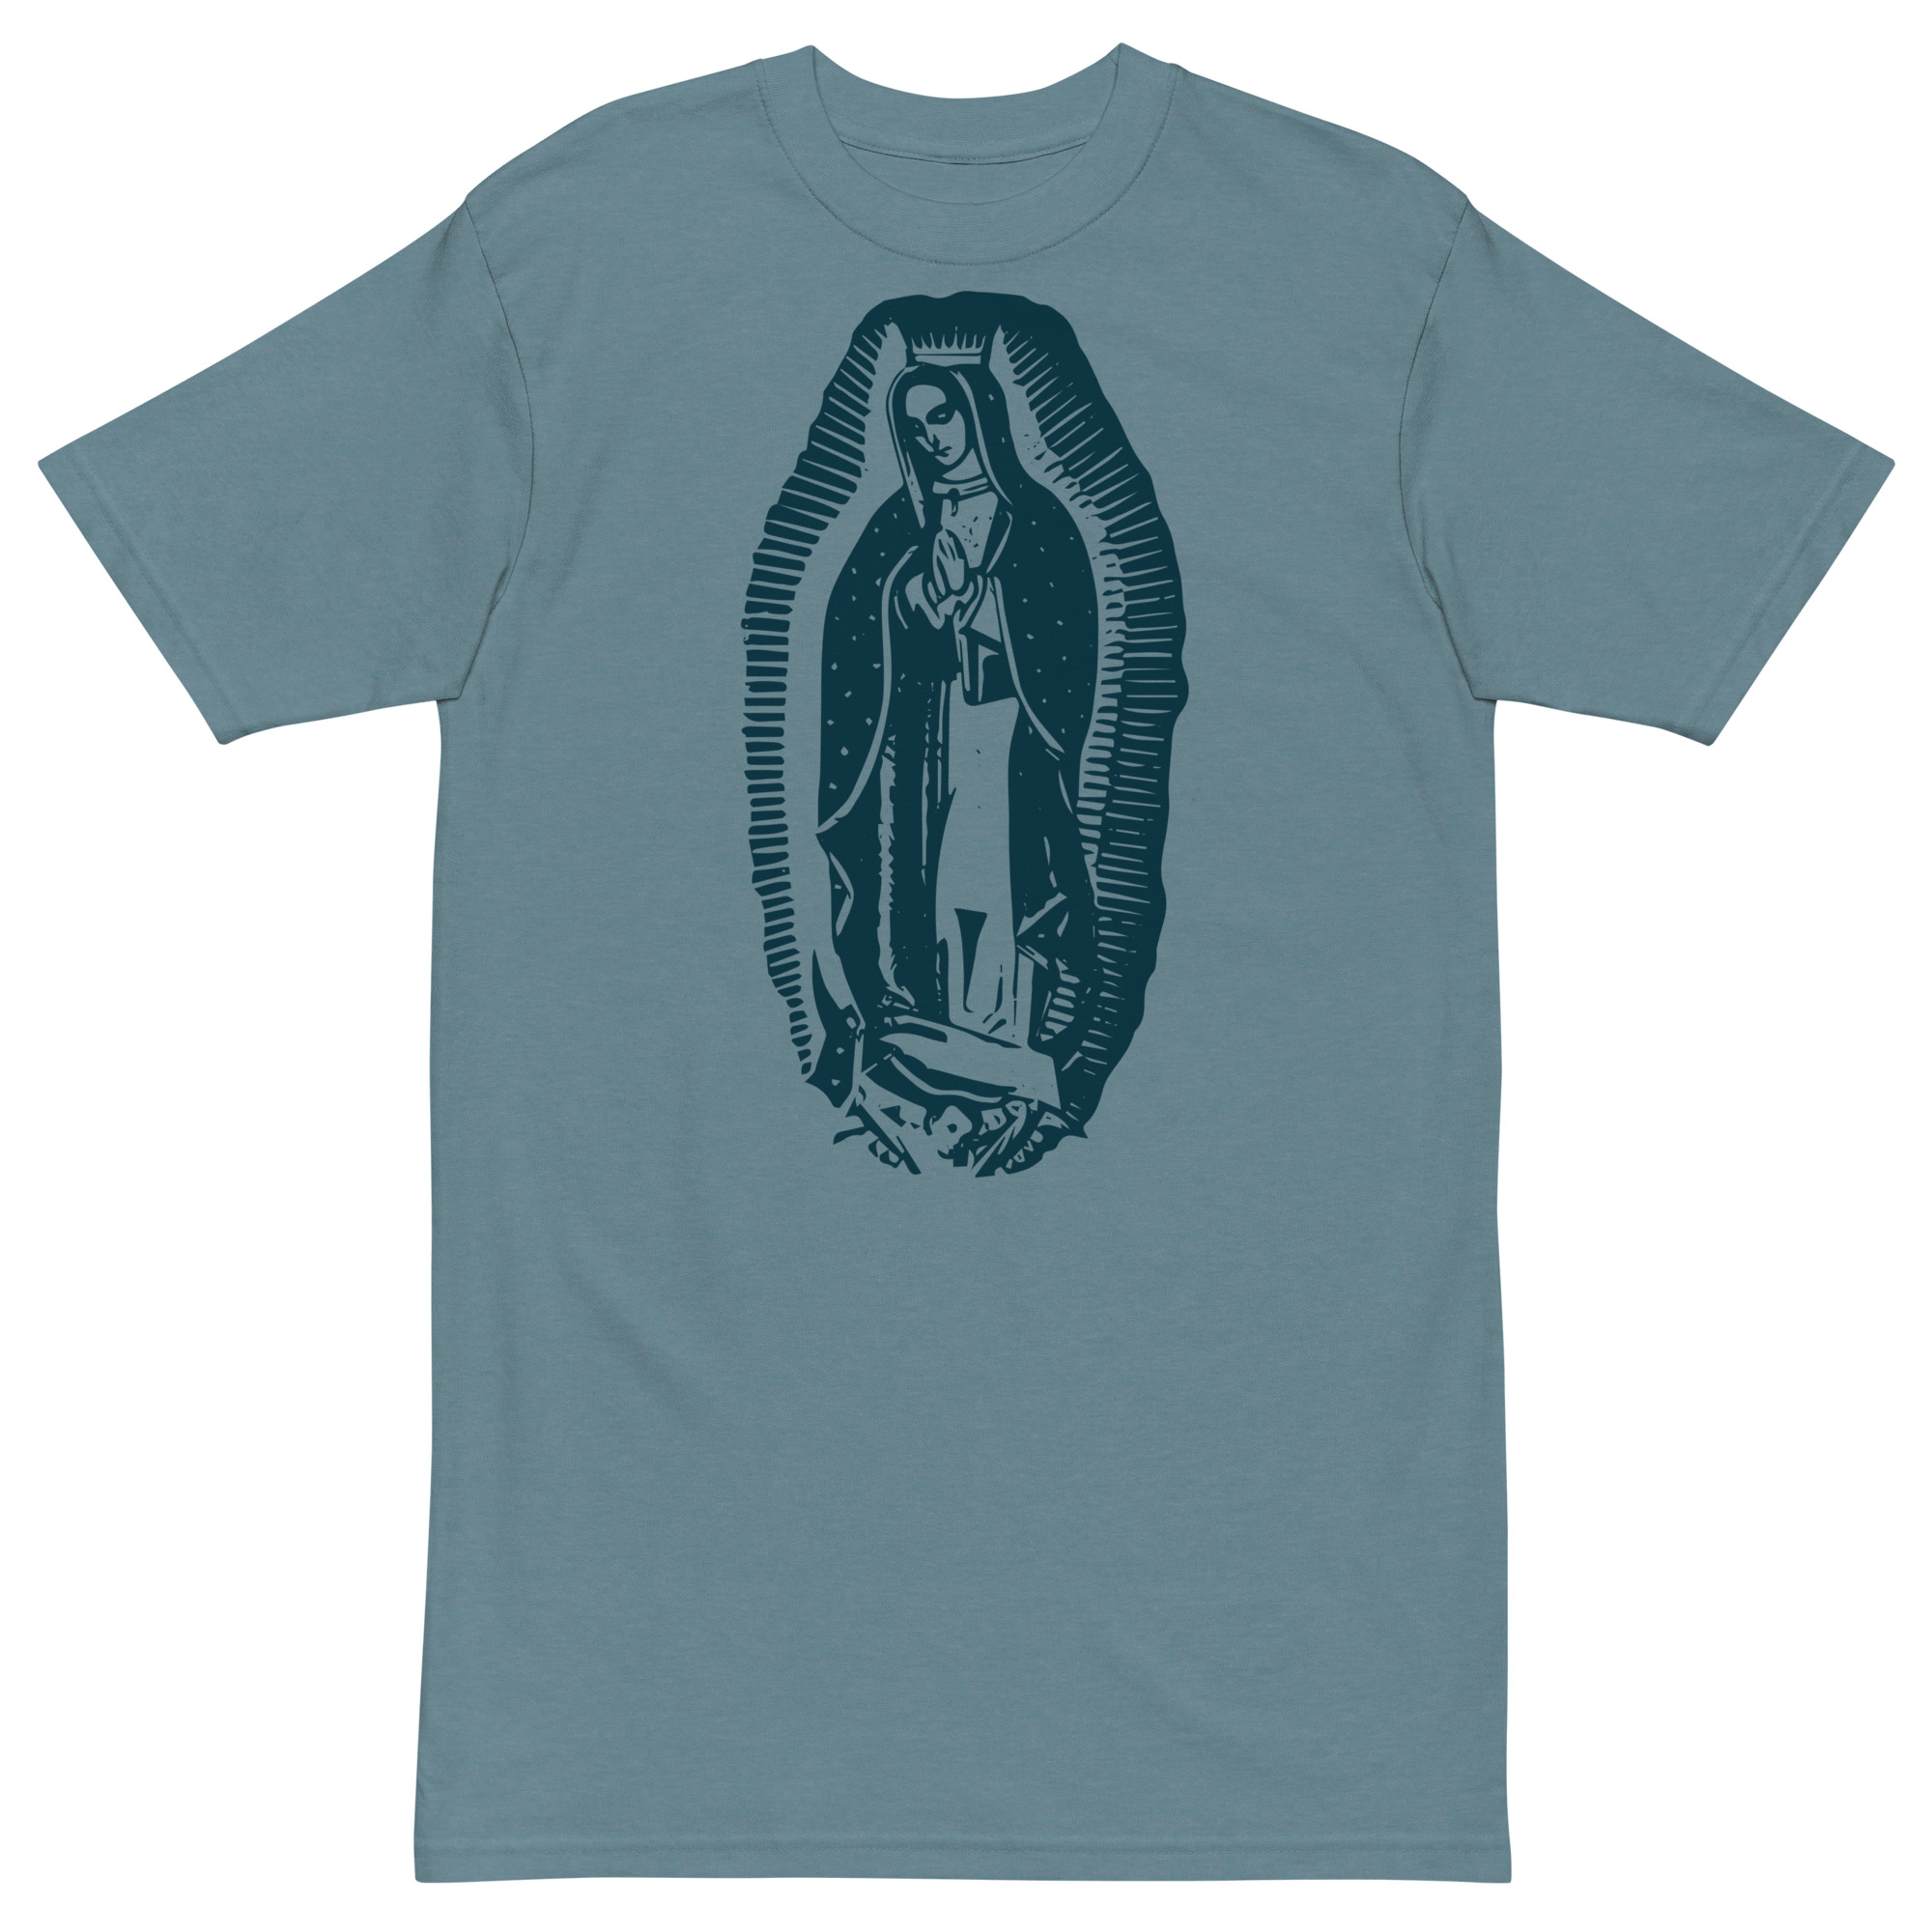 Our Lady of Guadalupe - premium heavyweight tee